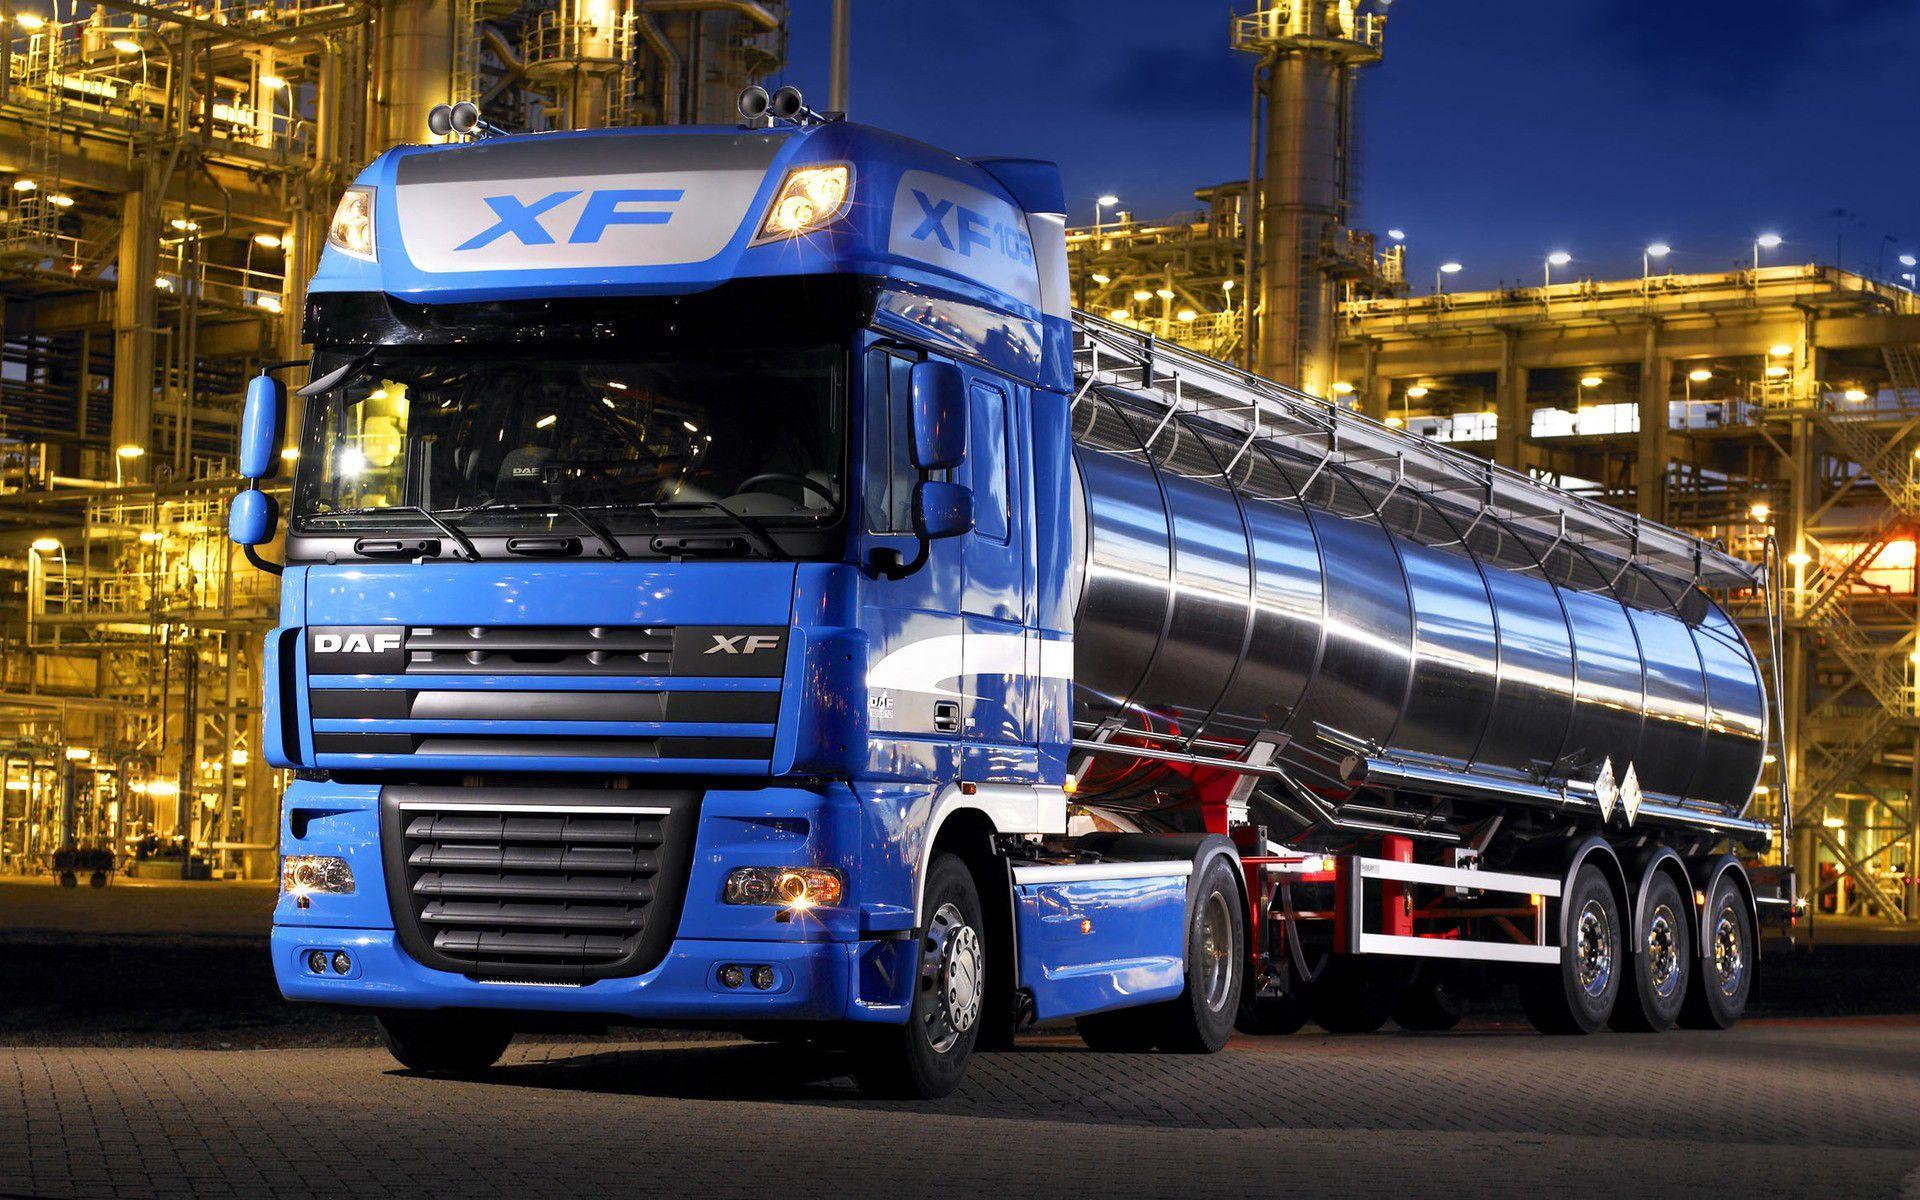 DAF XF truck wallpaper download. Wallpaper, picture, photo